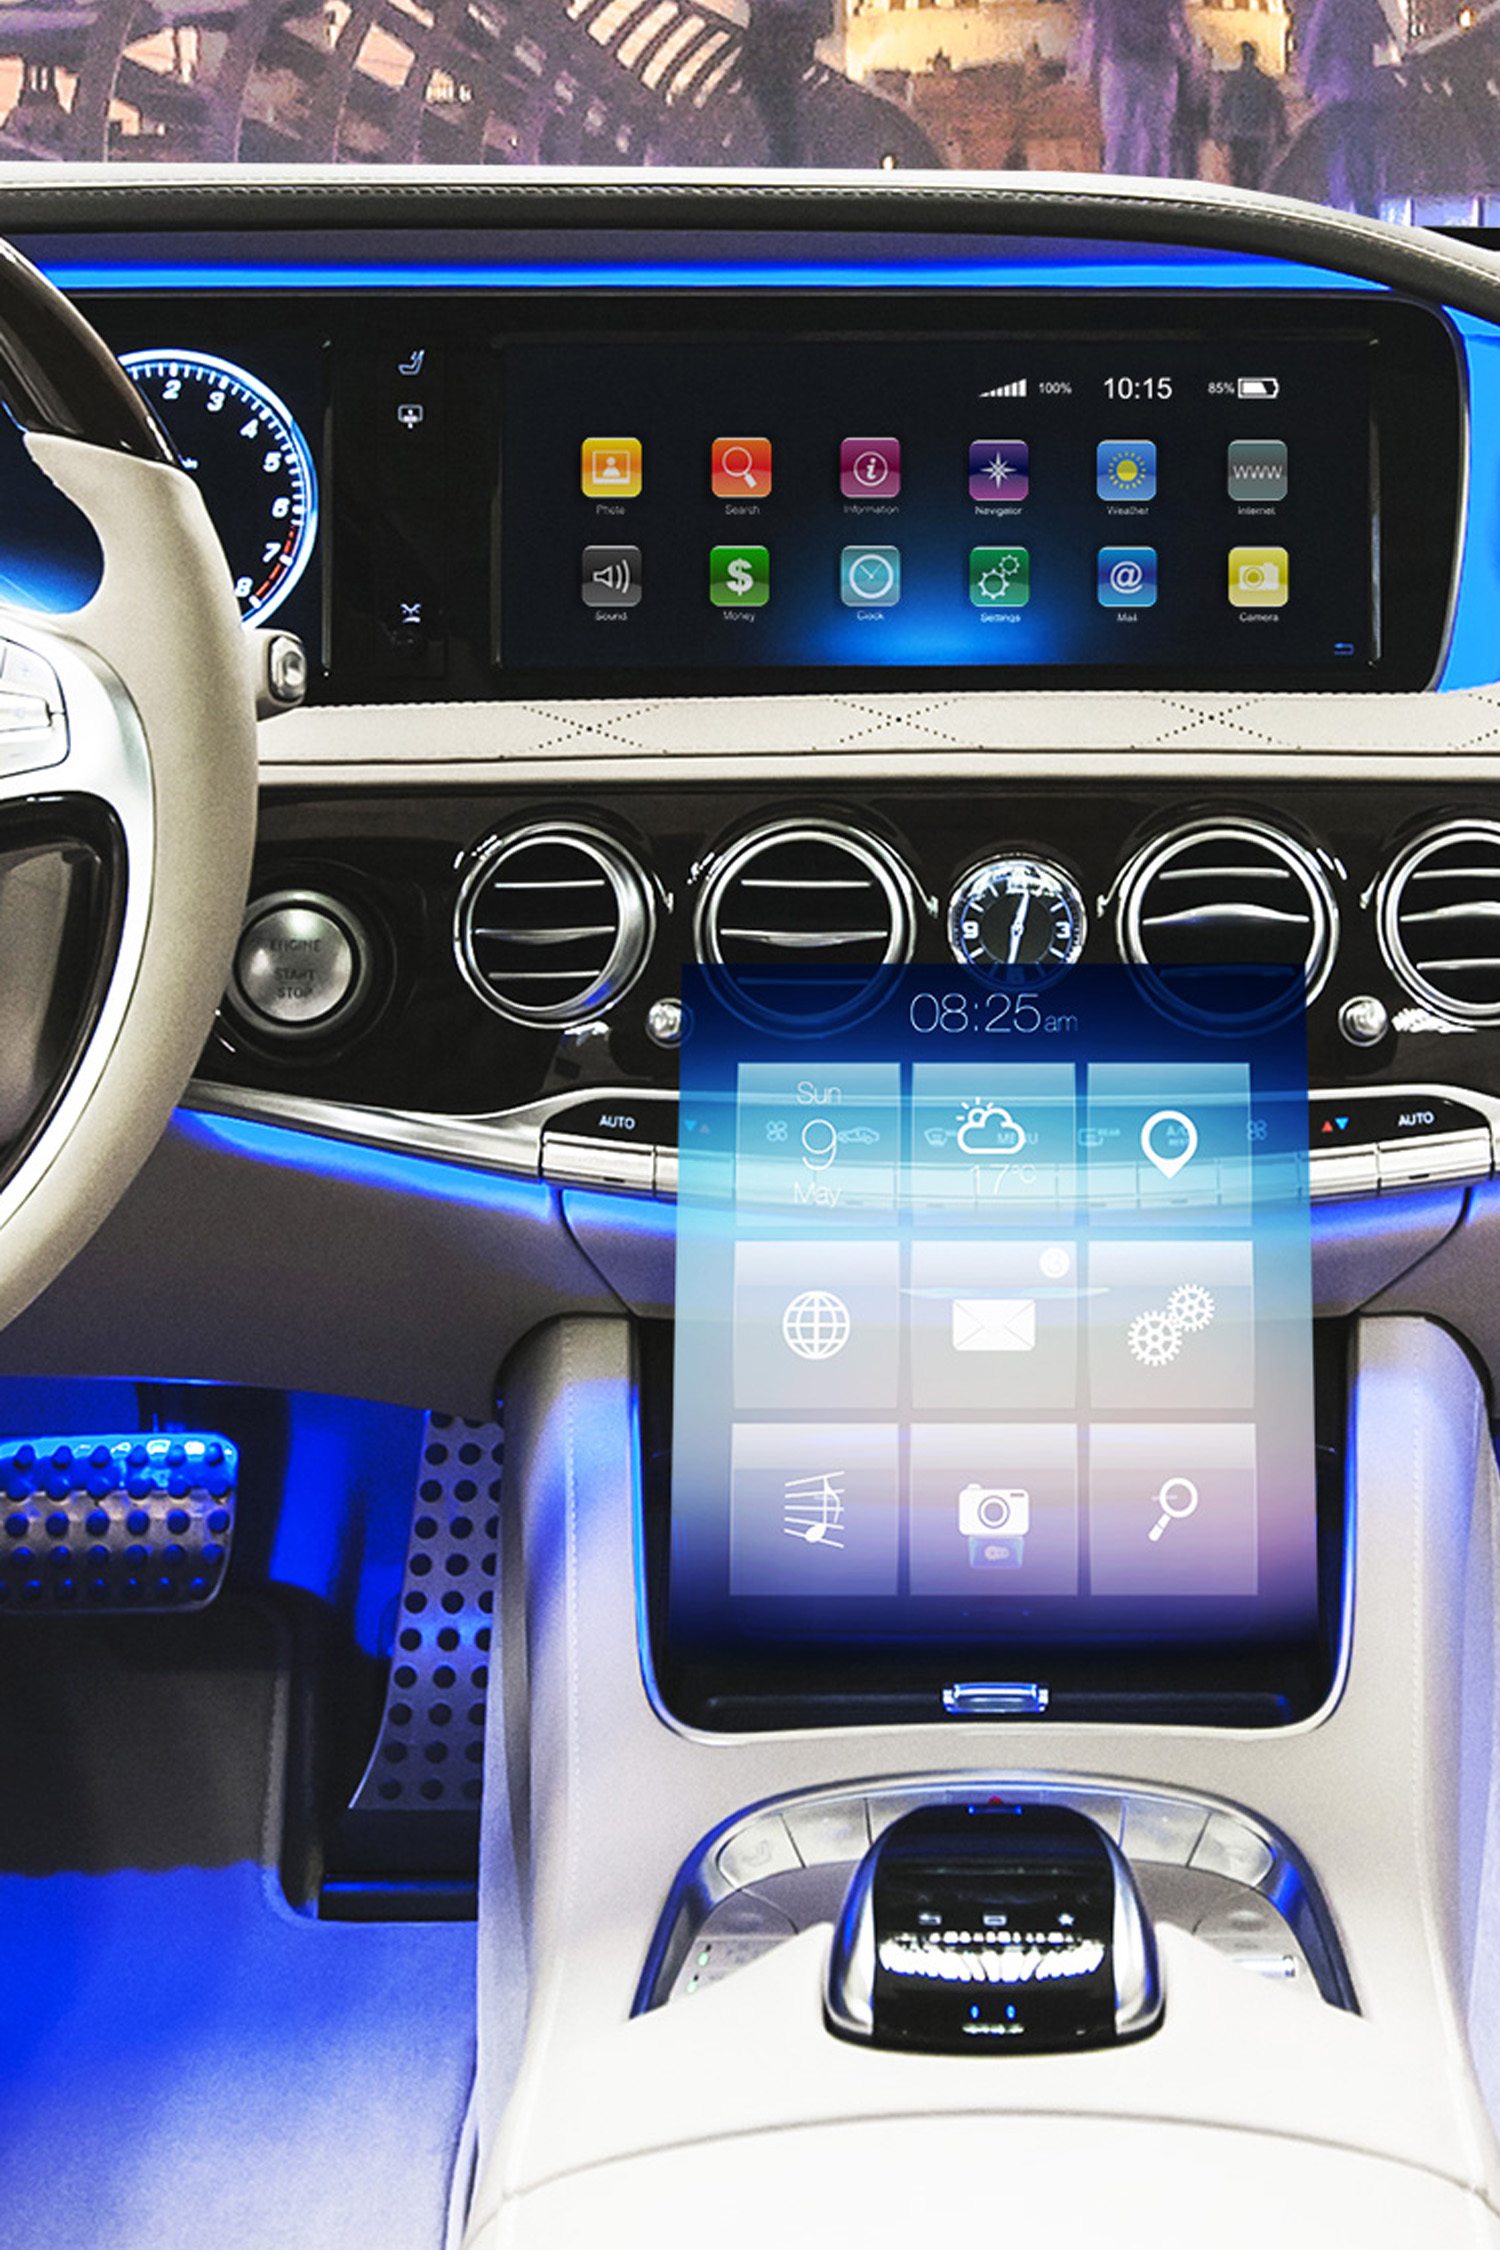 Application of Holographic in Automotive IVI System Control